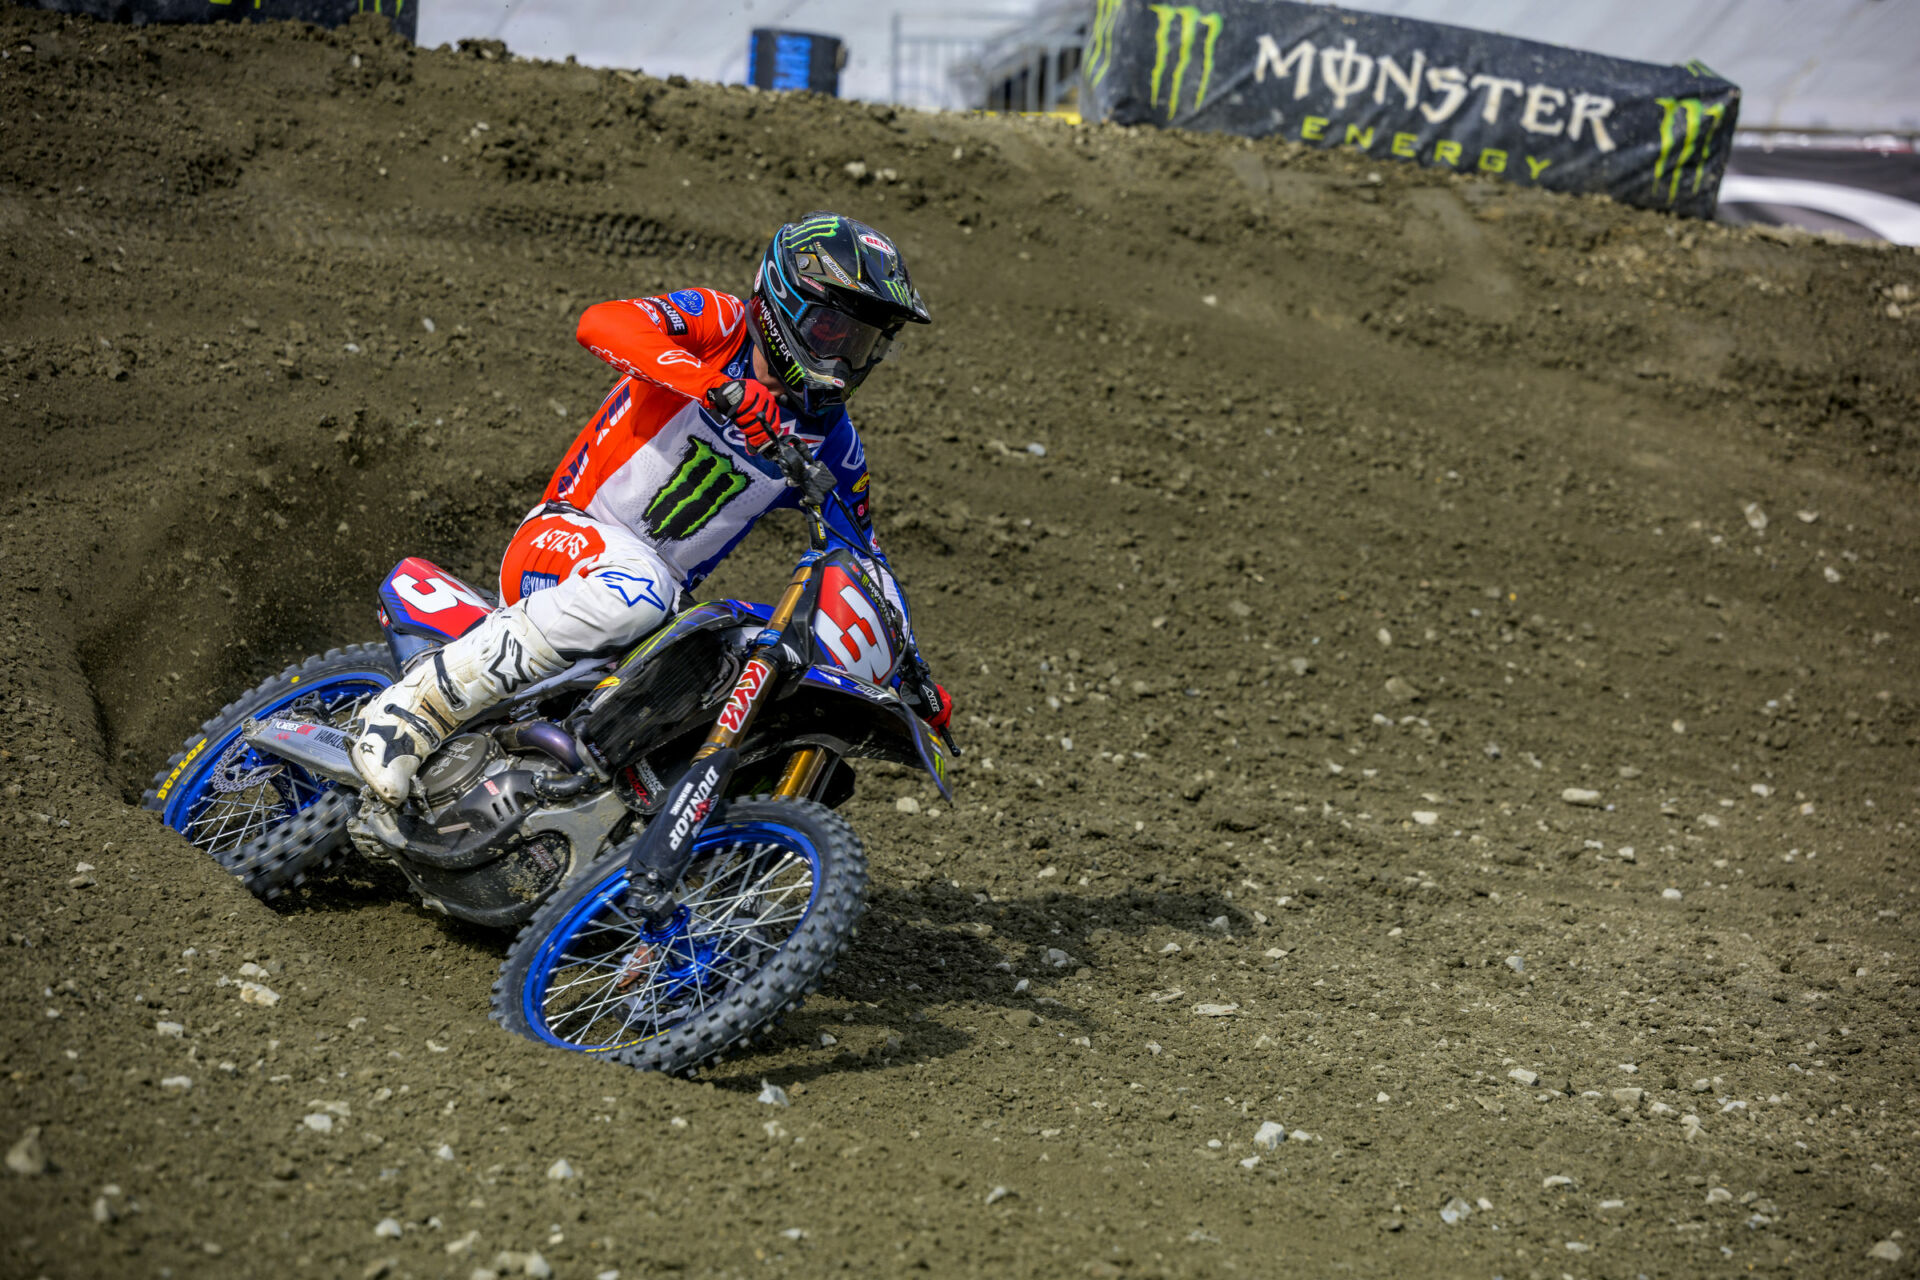 Denver SX Timetable and Where to watch Dirtbike Rider